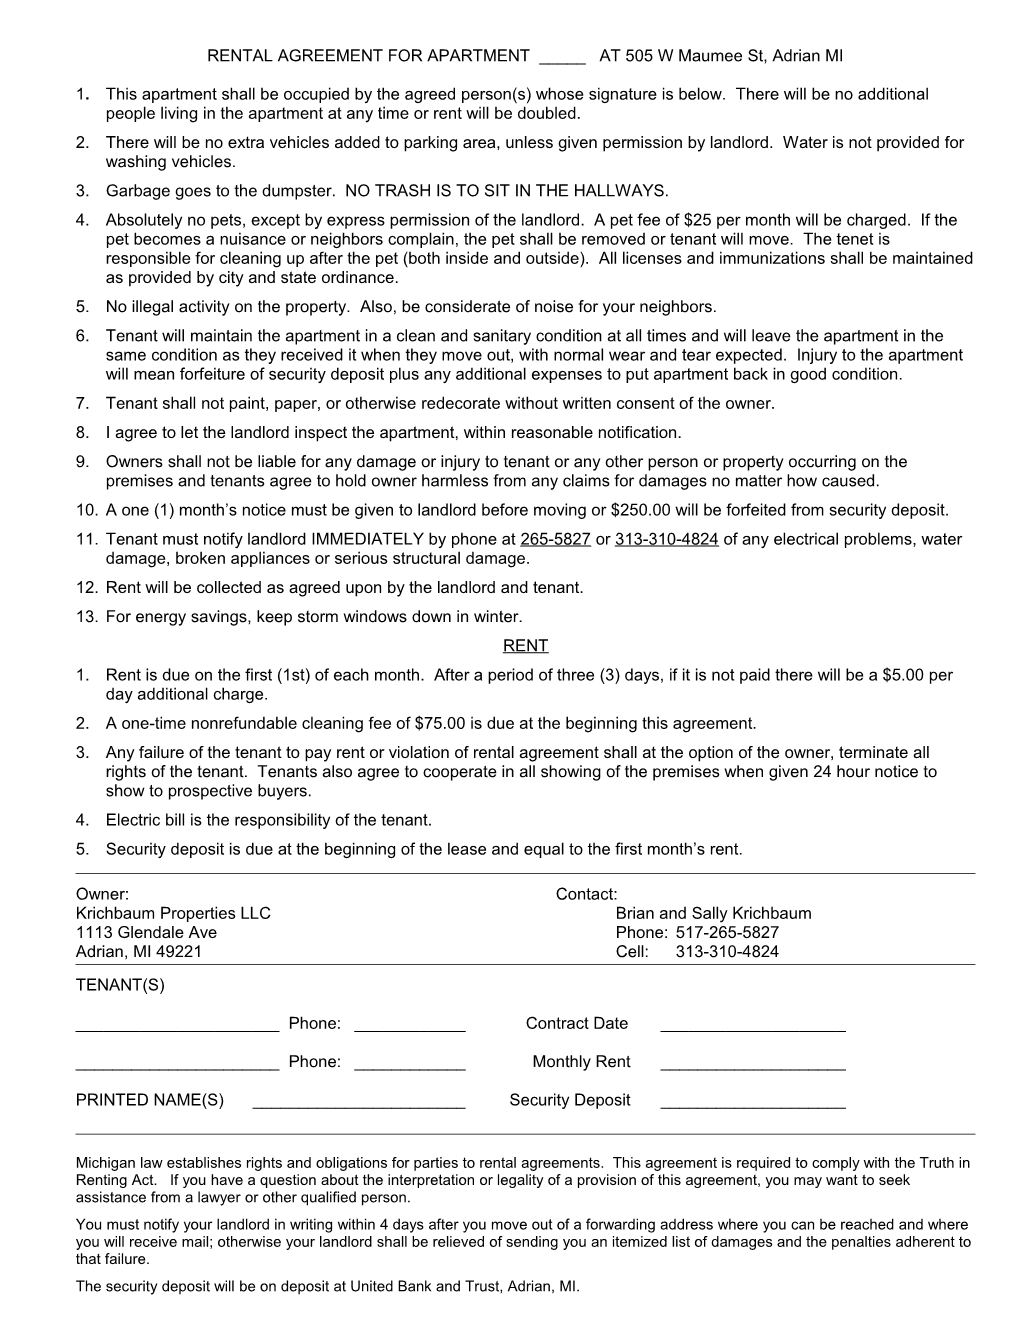 RENTAL AGREEMENT for APARTMENT _____ at 505 W Maumee St, Adrian MI